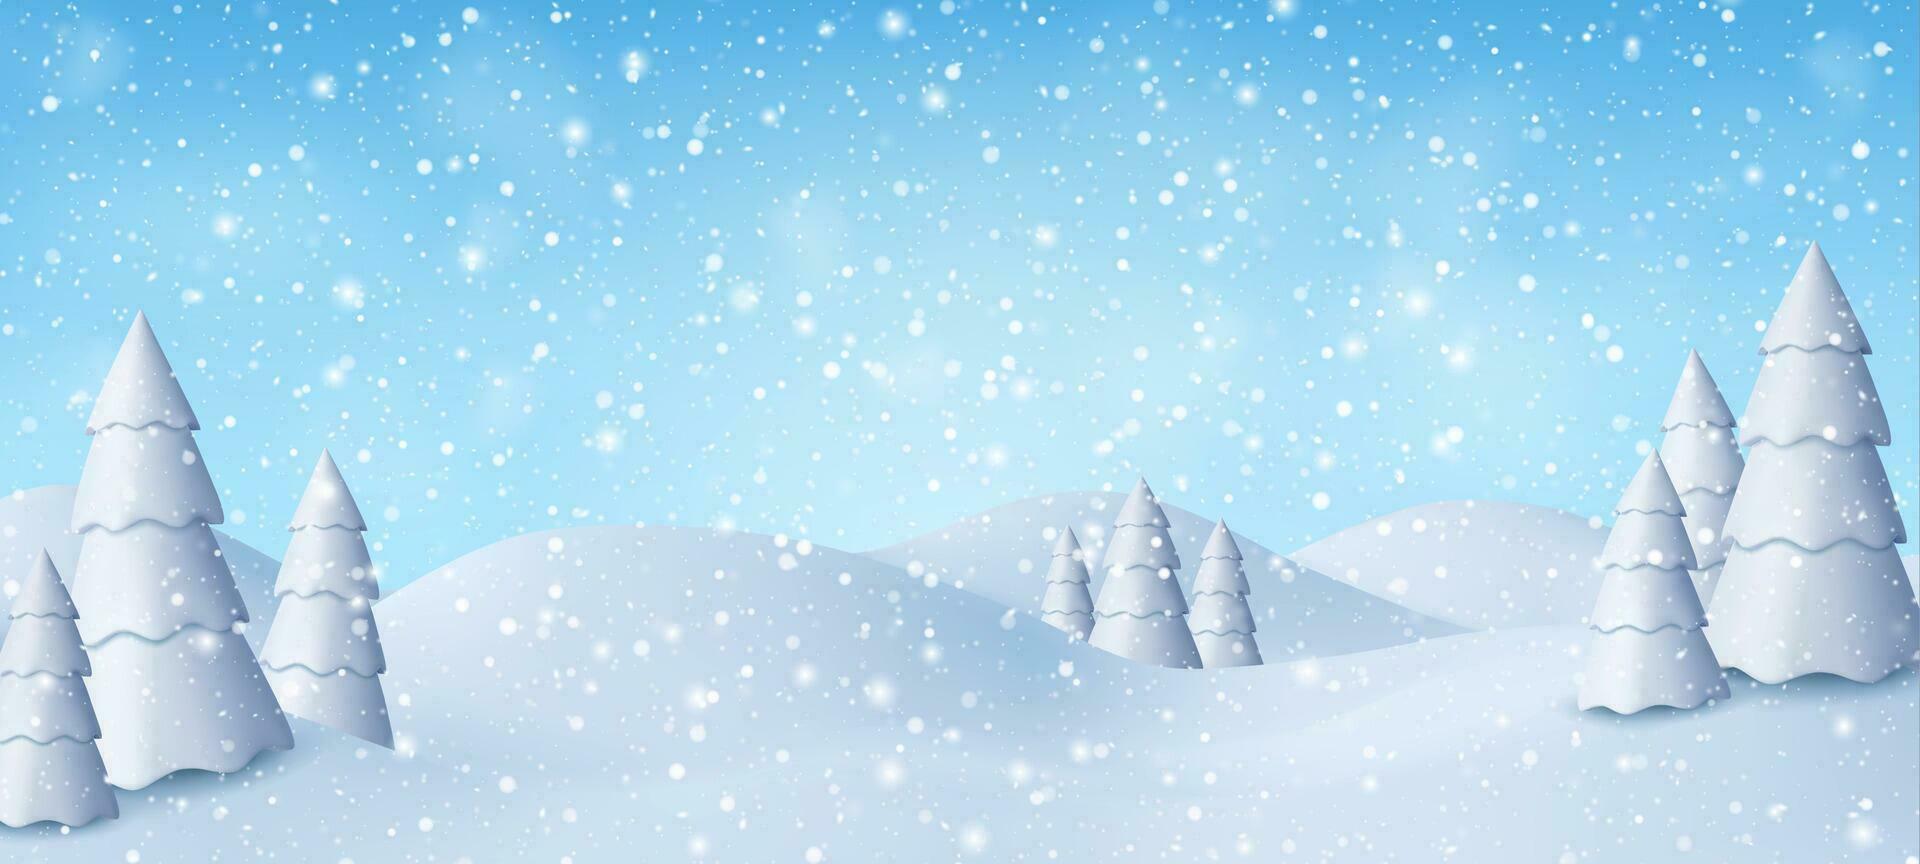 3d Natural Winter Christmas and new year background with blue sky, snowfall, snowflakes, snowdrifts and snowy fir trees.. Winter landscape with falling christmas shining snow. Vector illustration